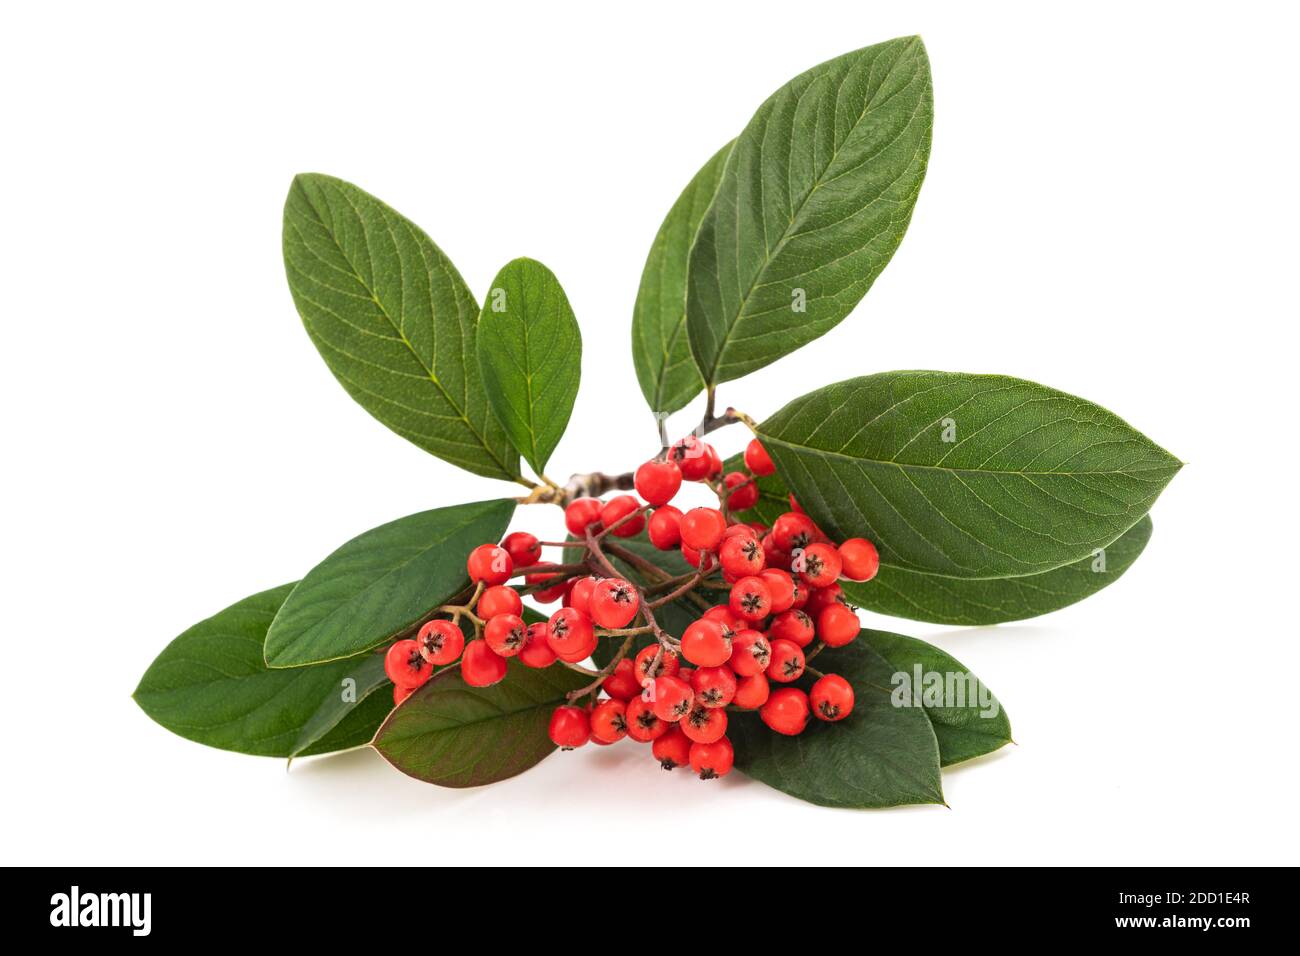 Cotoneaster branch with berries isolated on white background Stock Photo